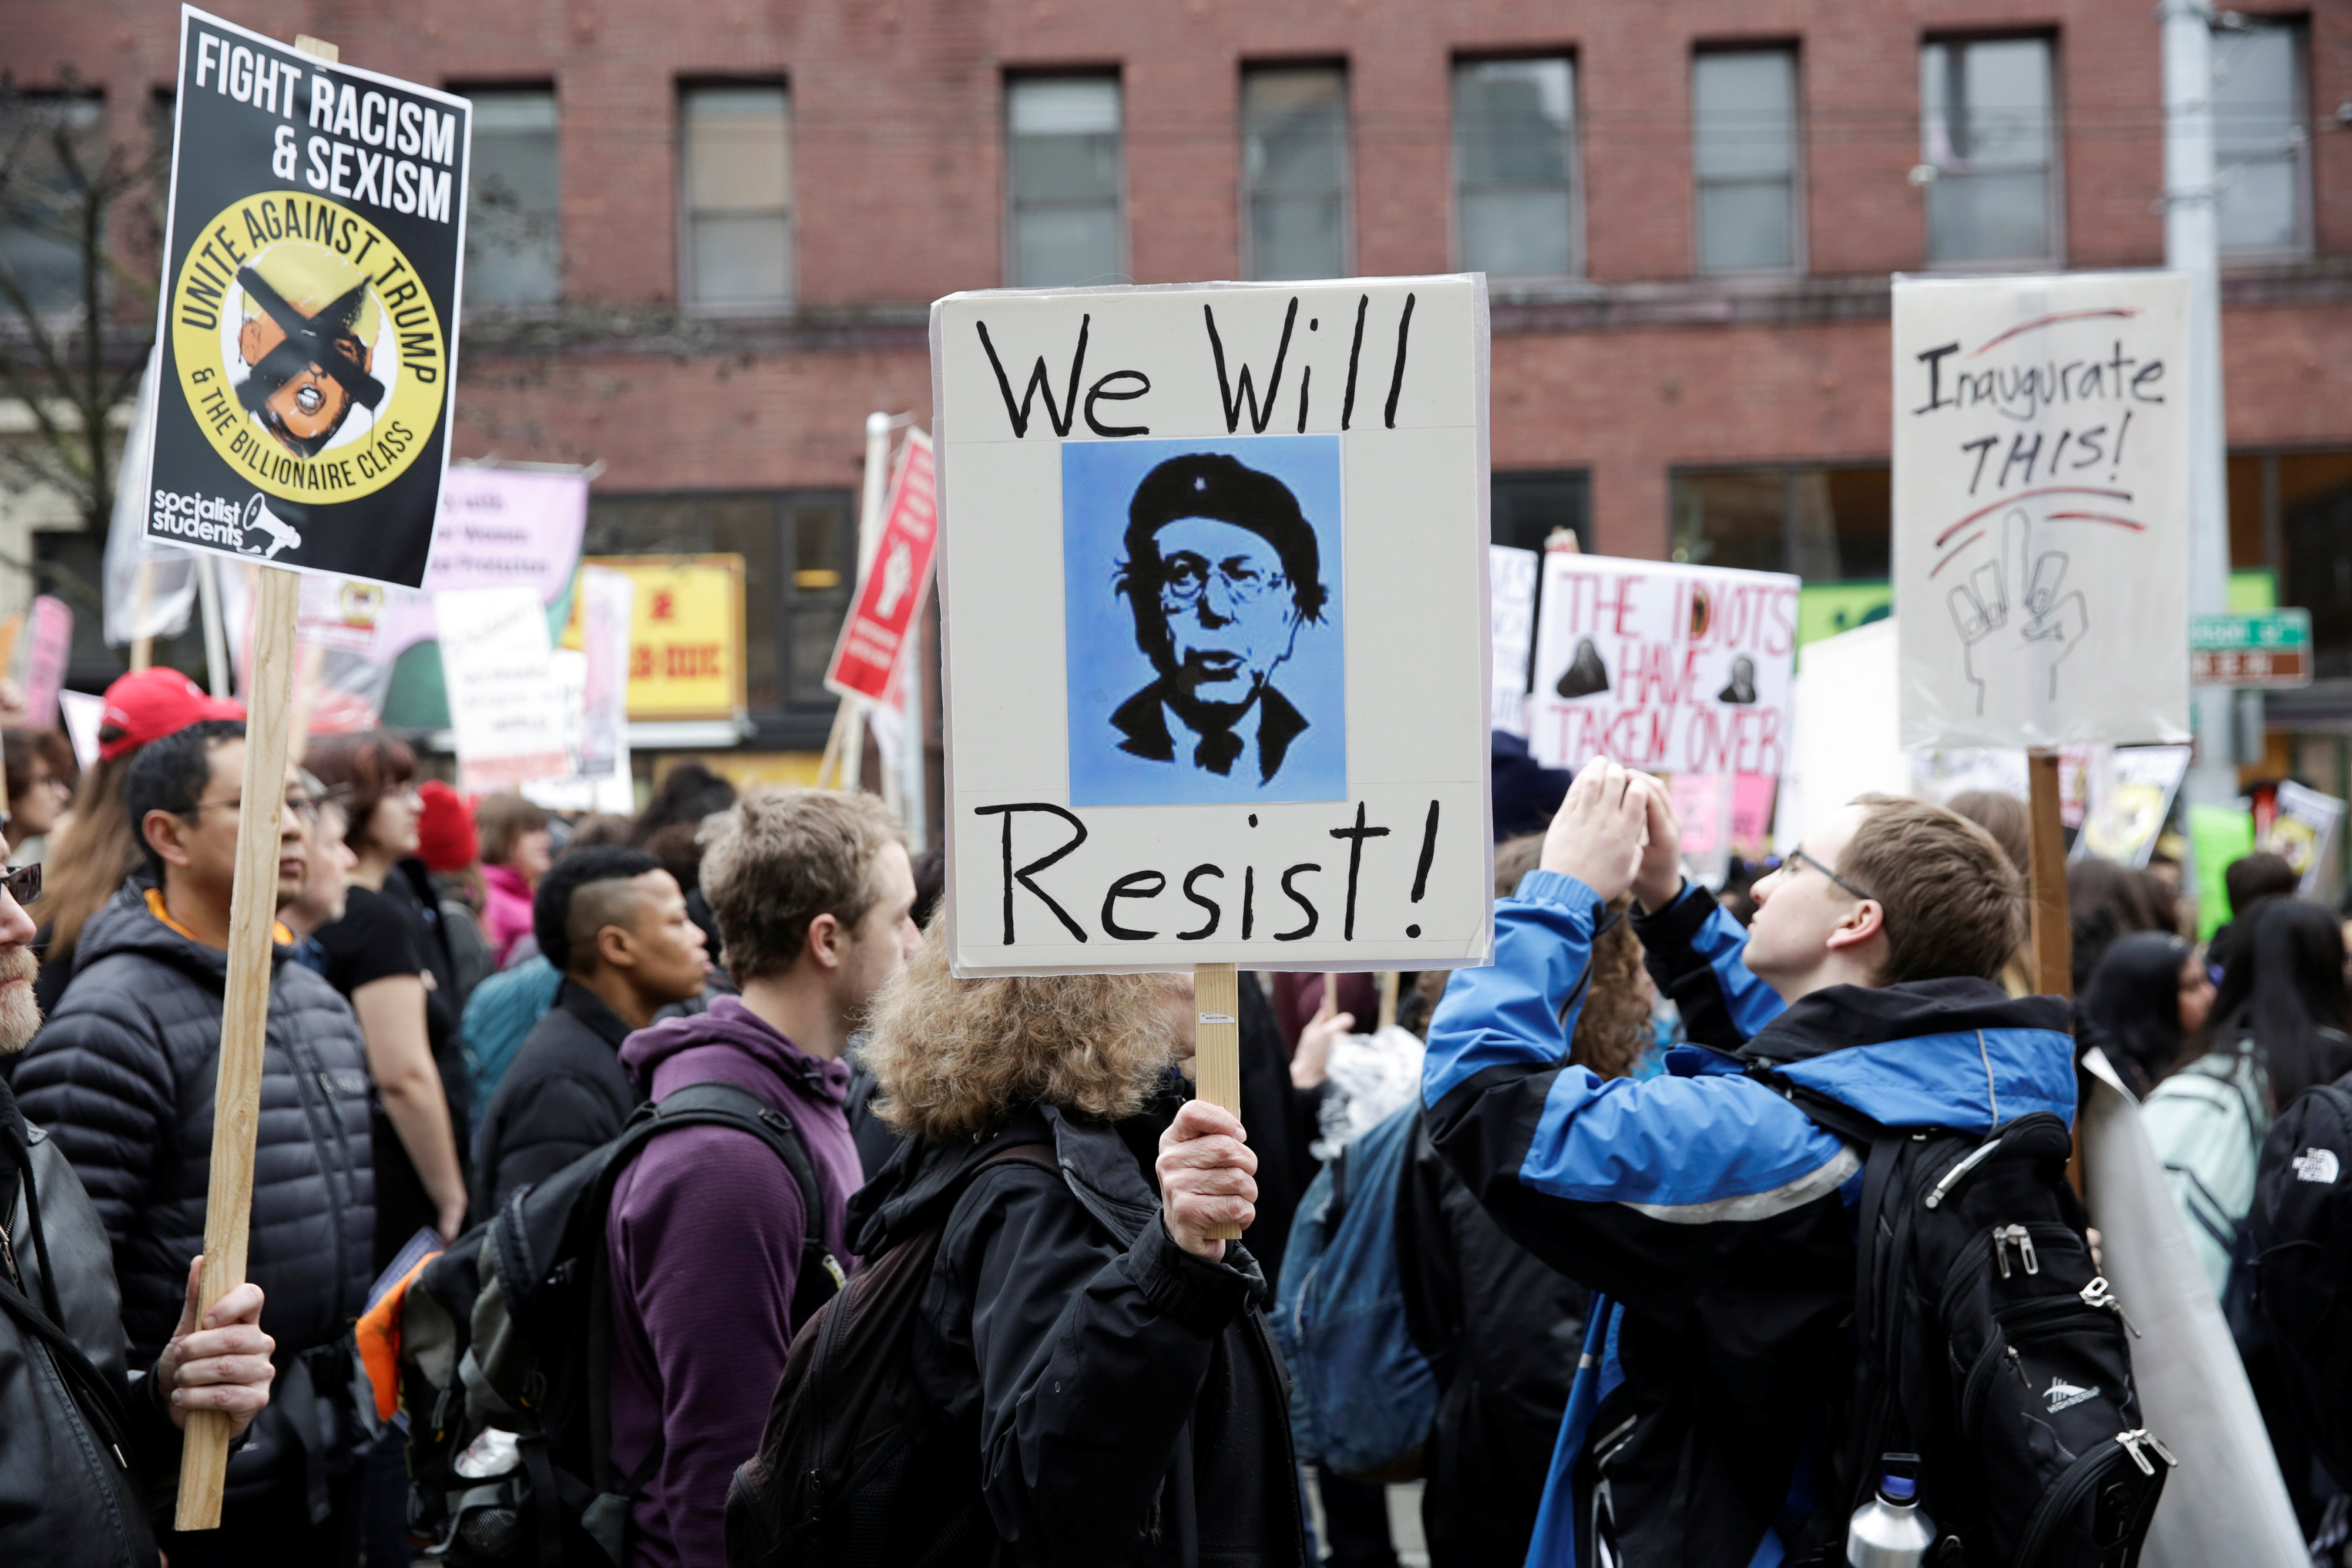 A photo of U.S. Senator Bernie Sanders is pictured on a demonstrator's sign as people march to protest U.S. President Donald Trump in Seattle, Washington.